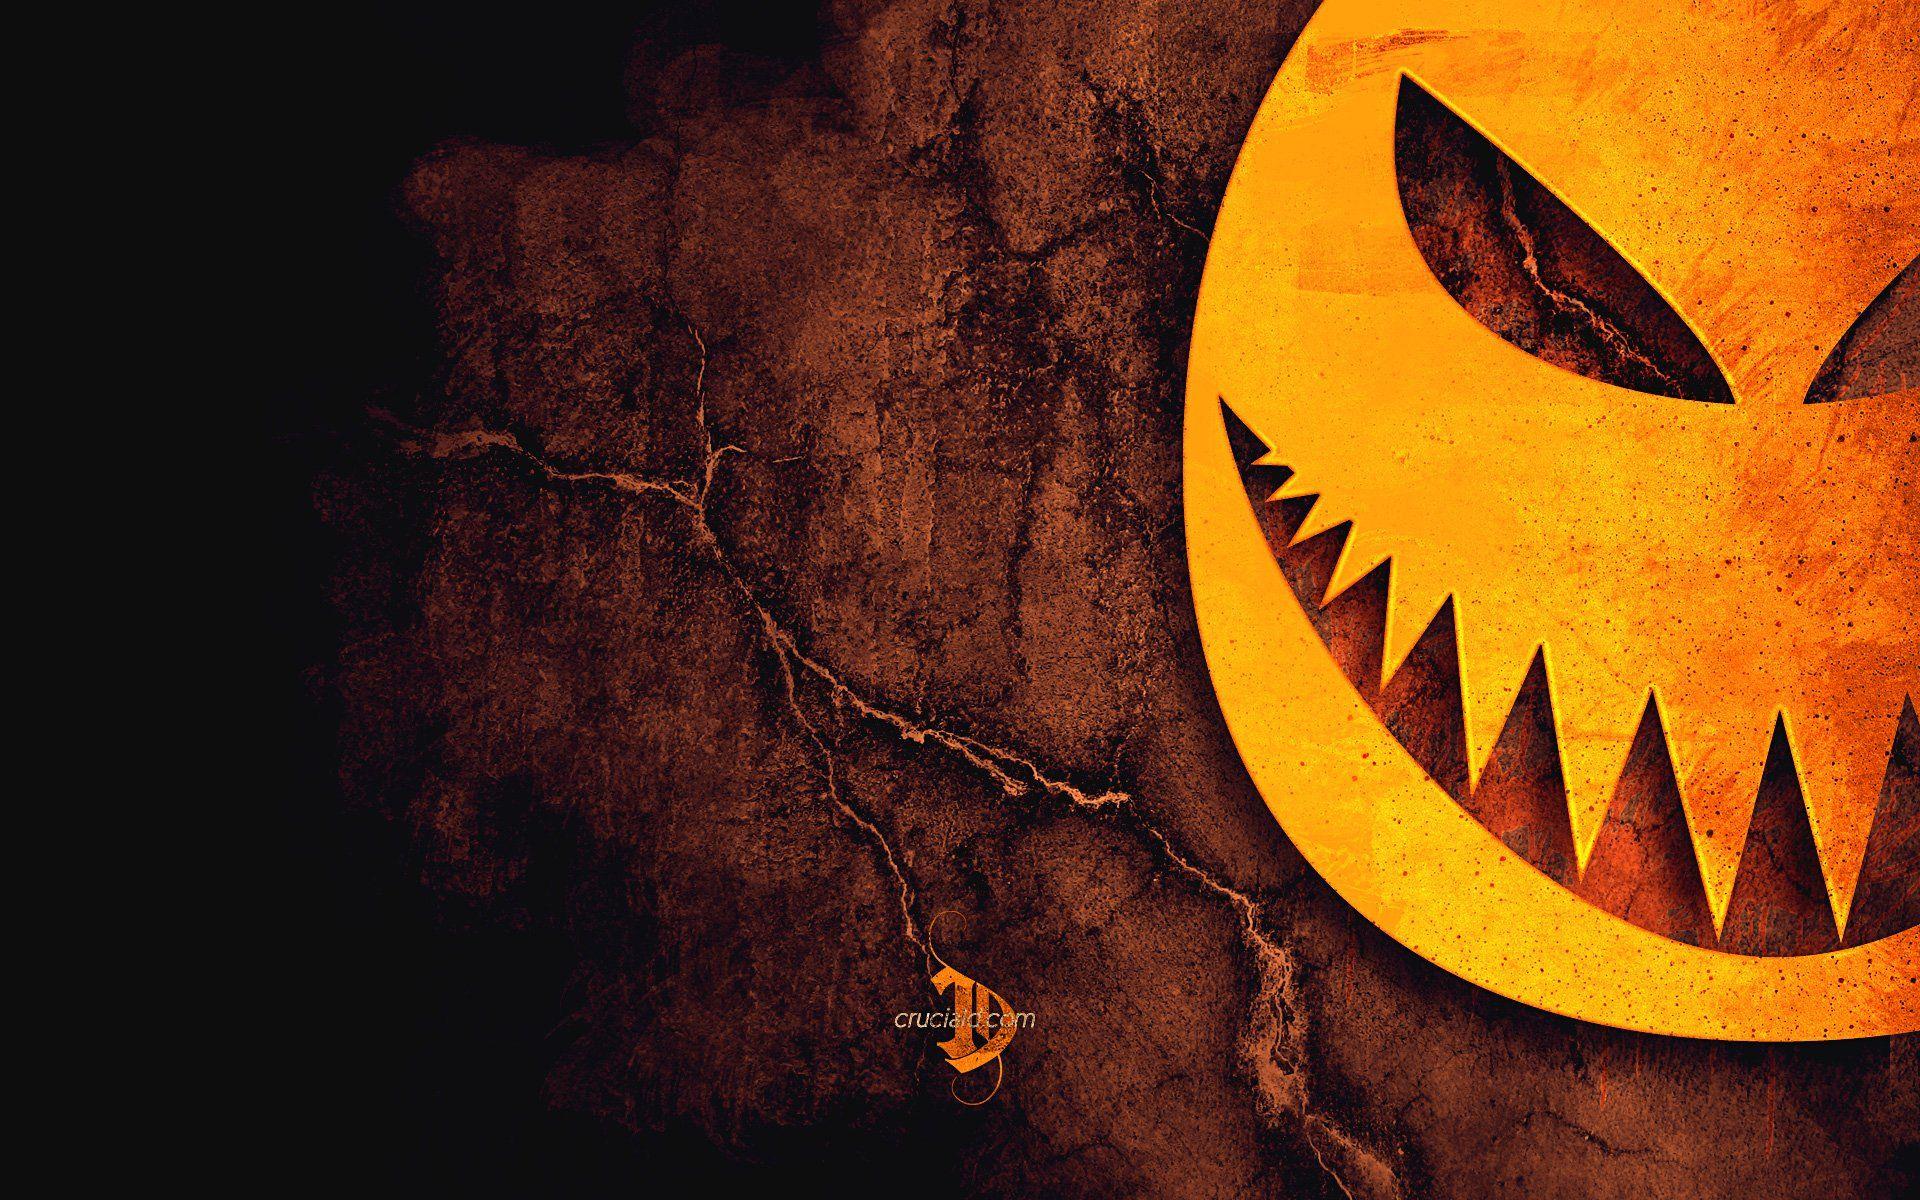 Awesome Halloween Wallpaper In High Definition. Halloween wallpaper, Halloween image, Pumpkin wallpaper